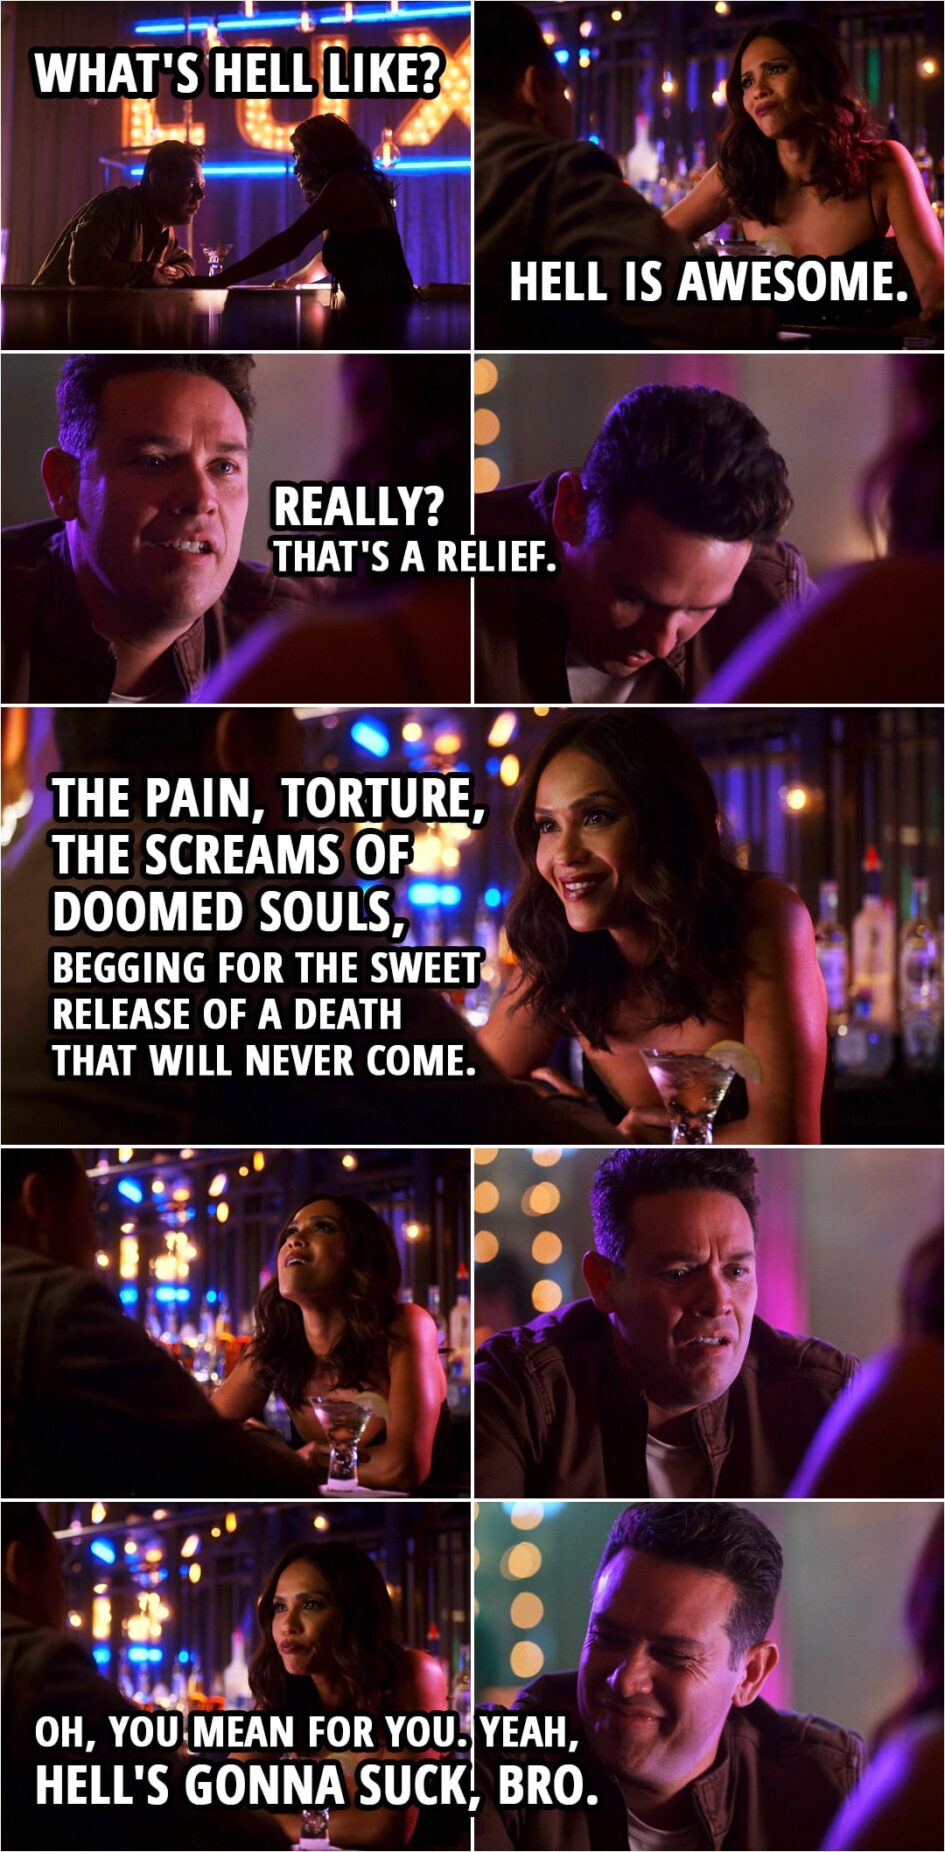 Quote from Lucifer 5x11 | Dan Espinoza: What's Hell like? Mazikeen: Oh, Hell is awesome. Dan Espinoza: Really? That's a relief. Mazikeen: The pain, torture, the screams of doomed souls, begging for the sweet release of a death that will never come. Oh, you mean for you. Yeah, Hell's gonna suck, bro.